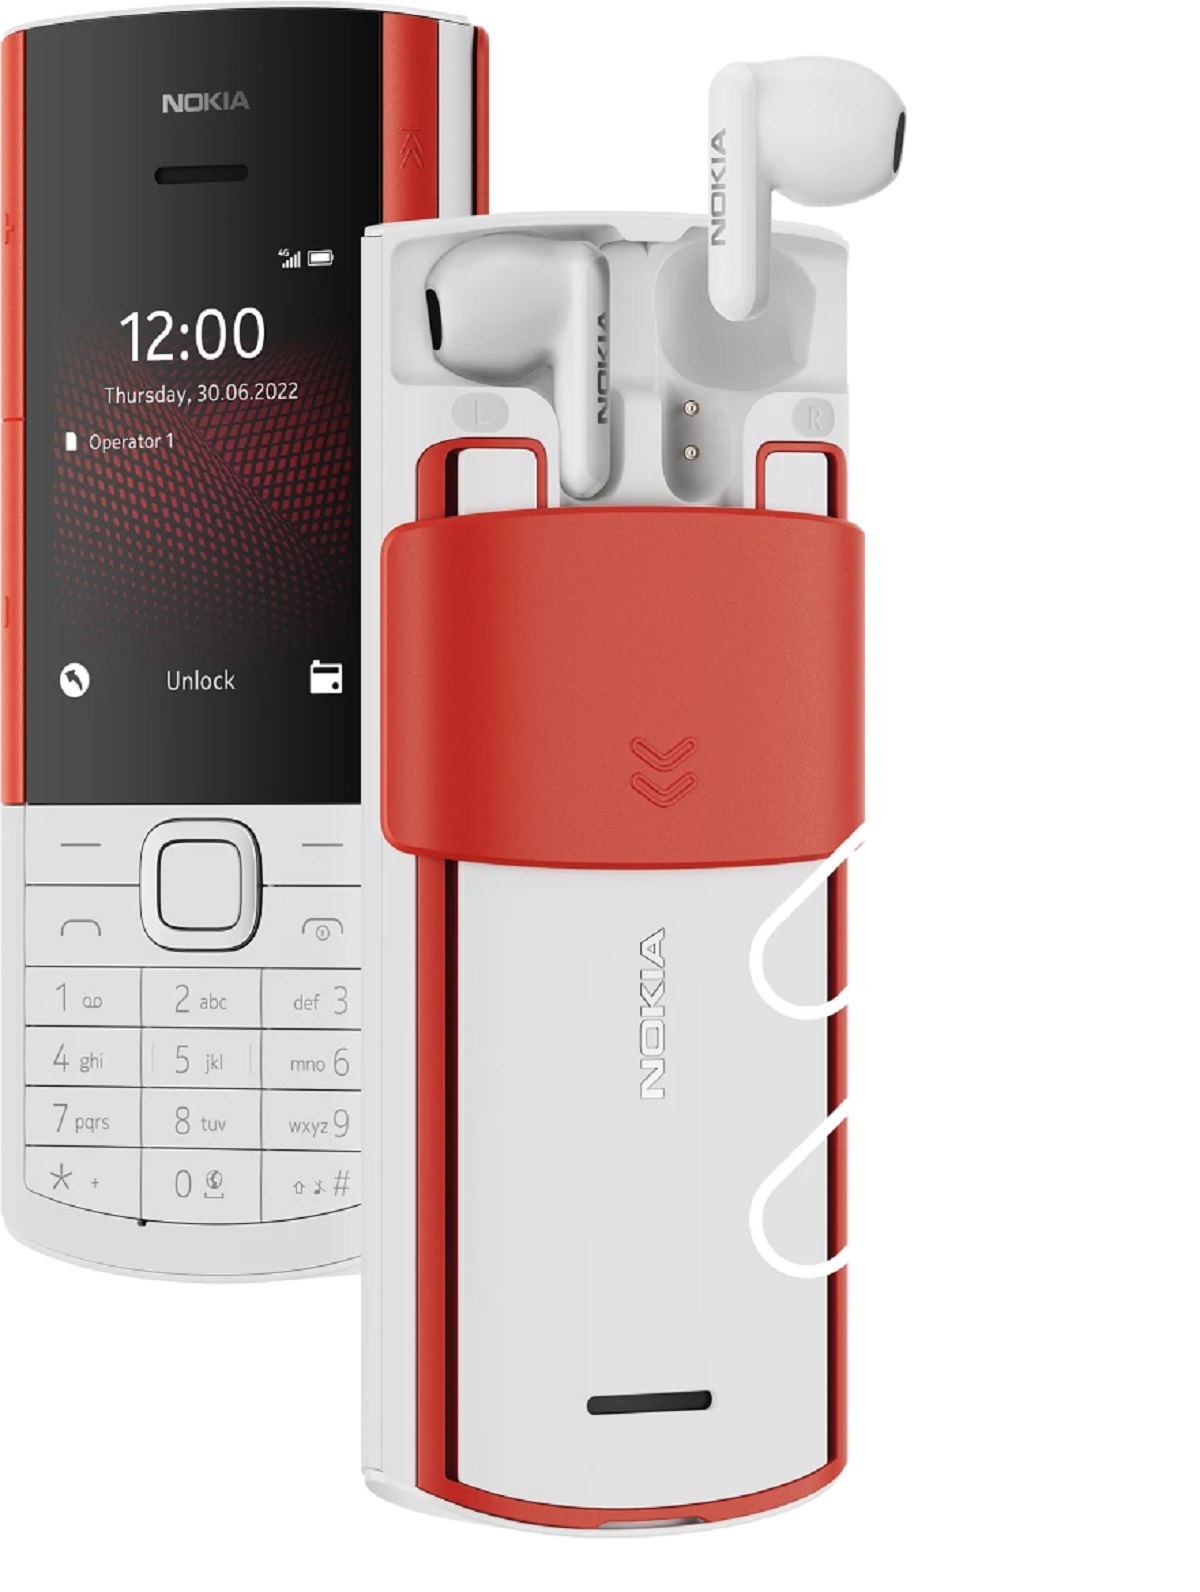 Nokia is re-launching its 8210 feature phone in a 4G version